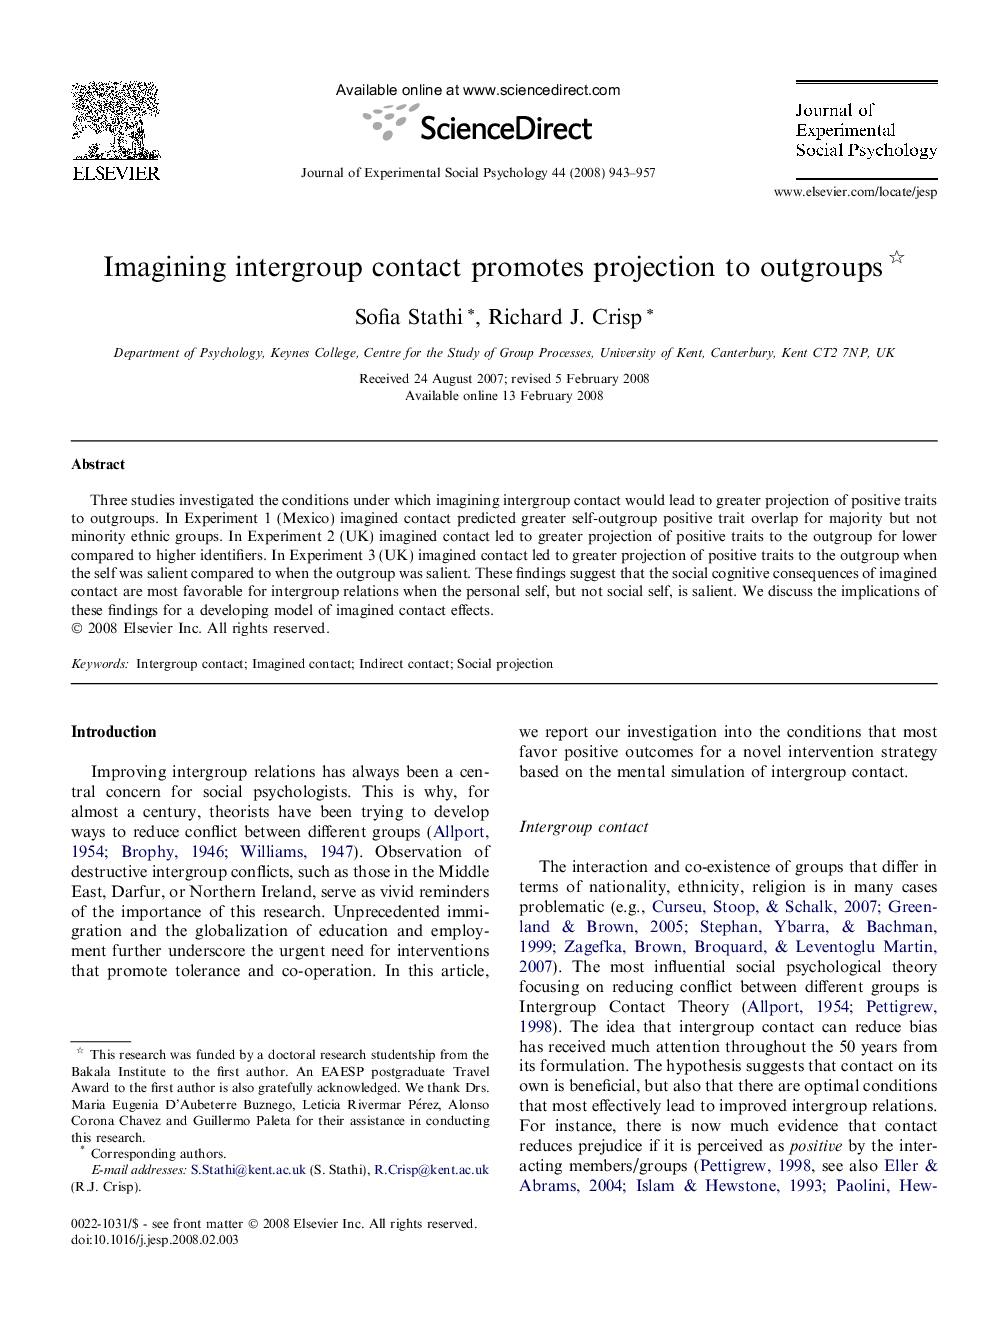 Imagining intergroup contact promotes projection to outgroups